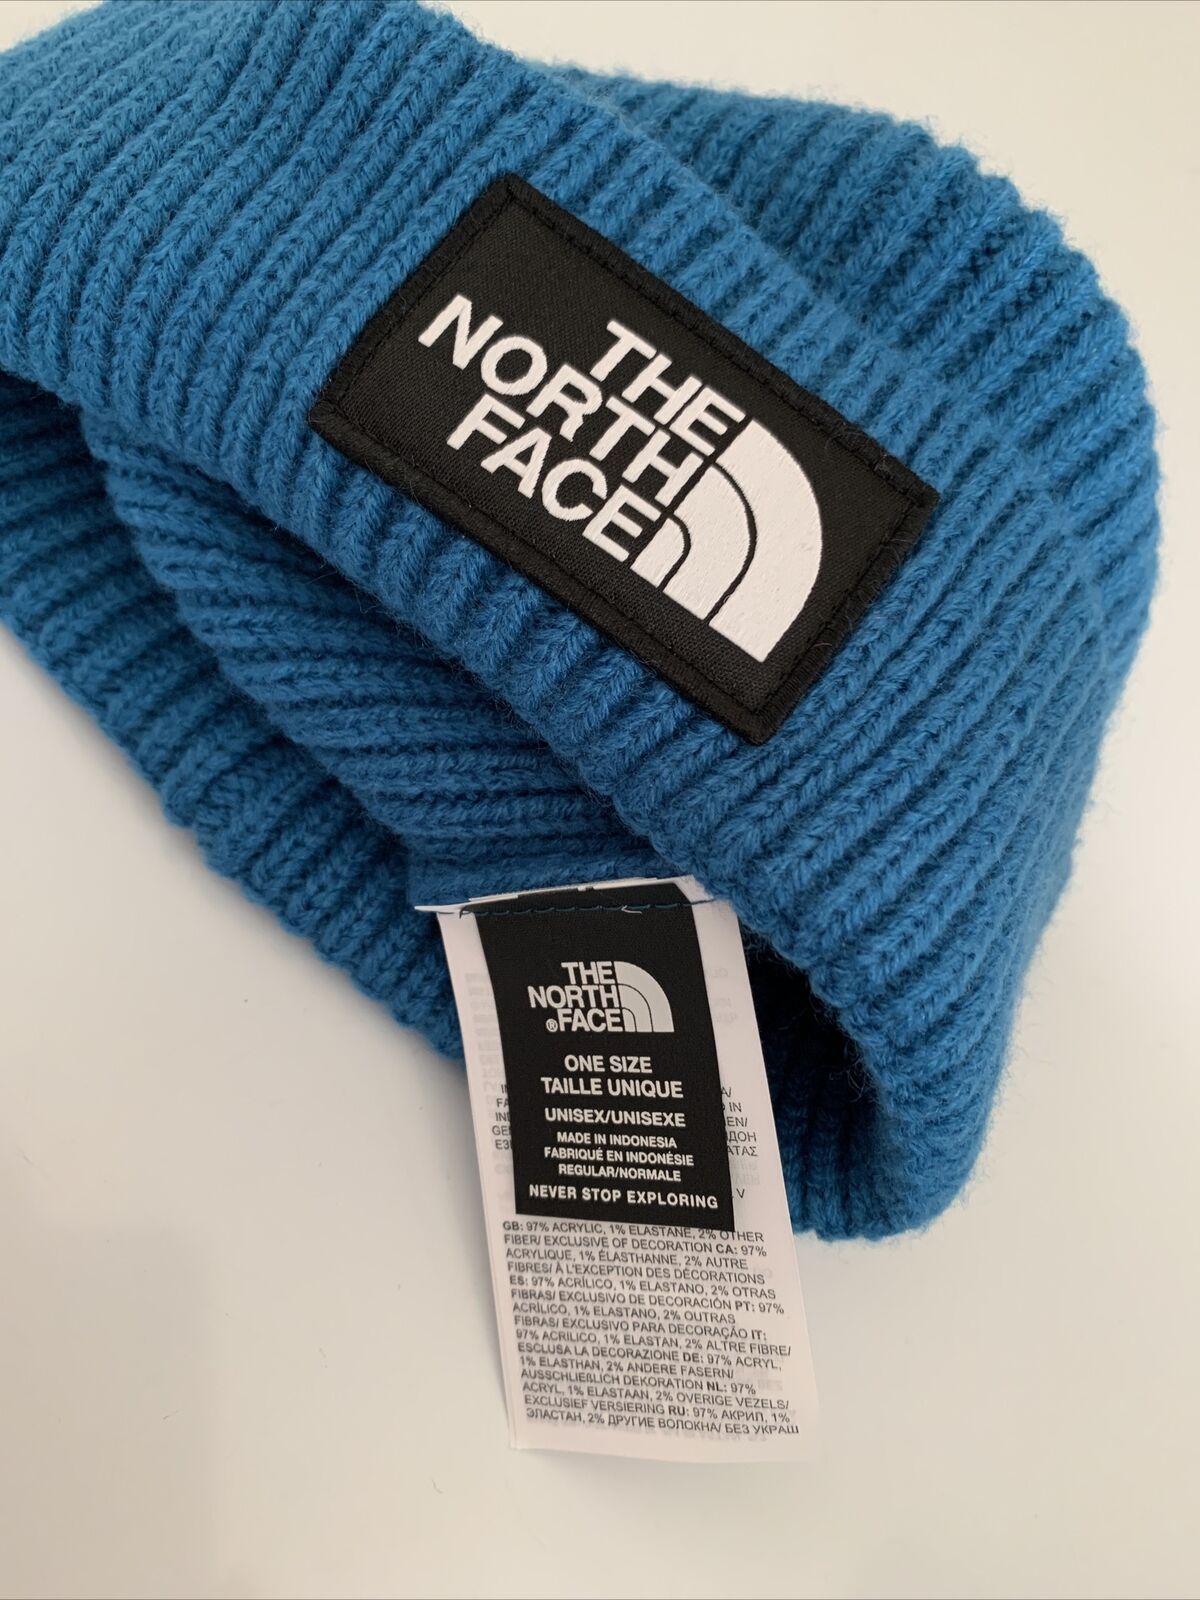 The North Face TNF Logo Box Cuffed Beanie Hat Youth Junior Unisex Blue Size OS The North Face - фотография #7